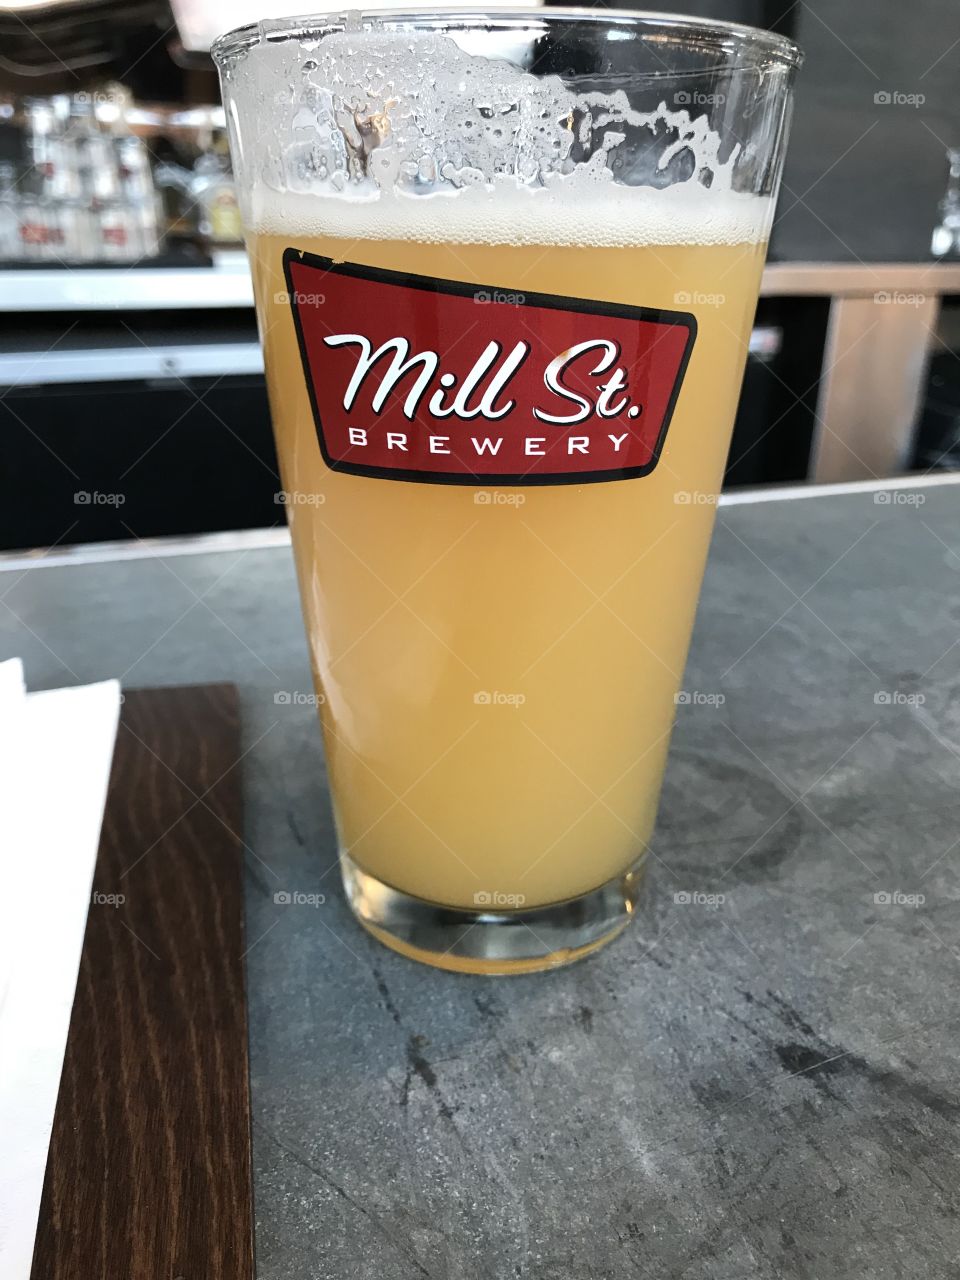 The “head” of a draught beer is a thin layer of foam on top, indicating a good pour. Also, if the head sticks to the glass after a sip this indicates a clean glass. Mill Street Brewery in Toronto got both of these perfect with this delicious IPA.